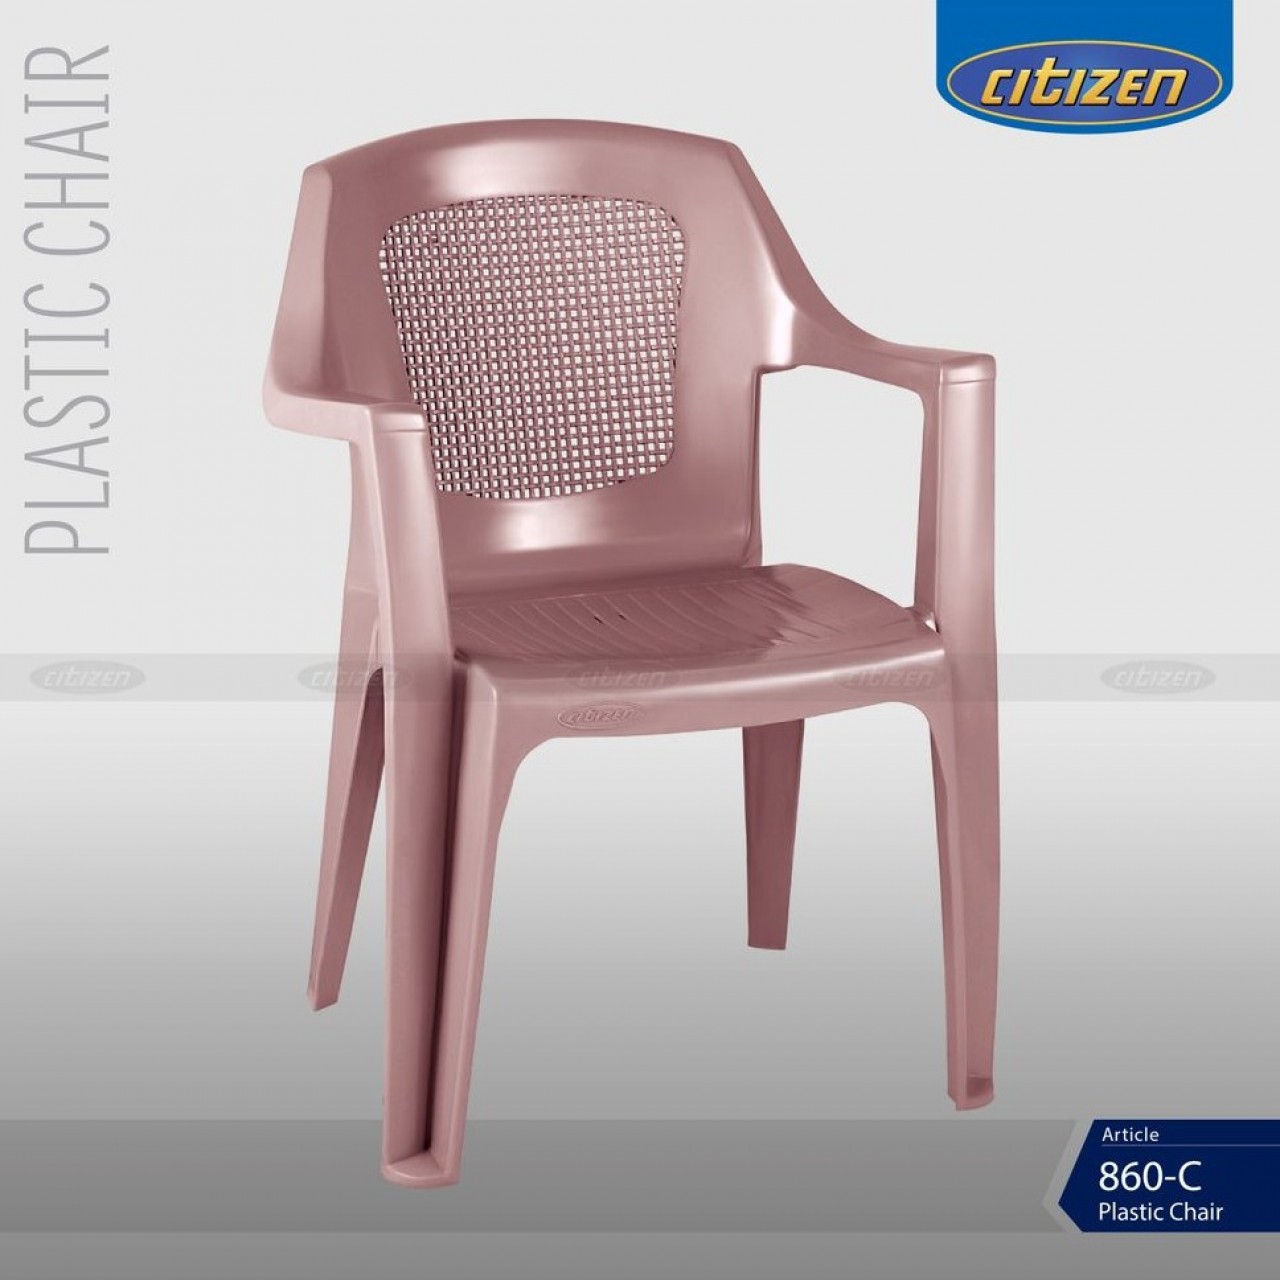 Citizen 860 Plastic Crystal & Regular Chair With Arms